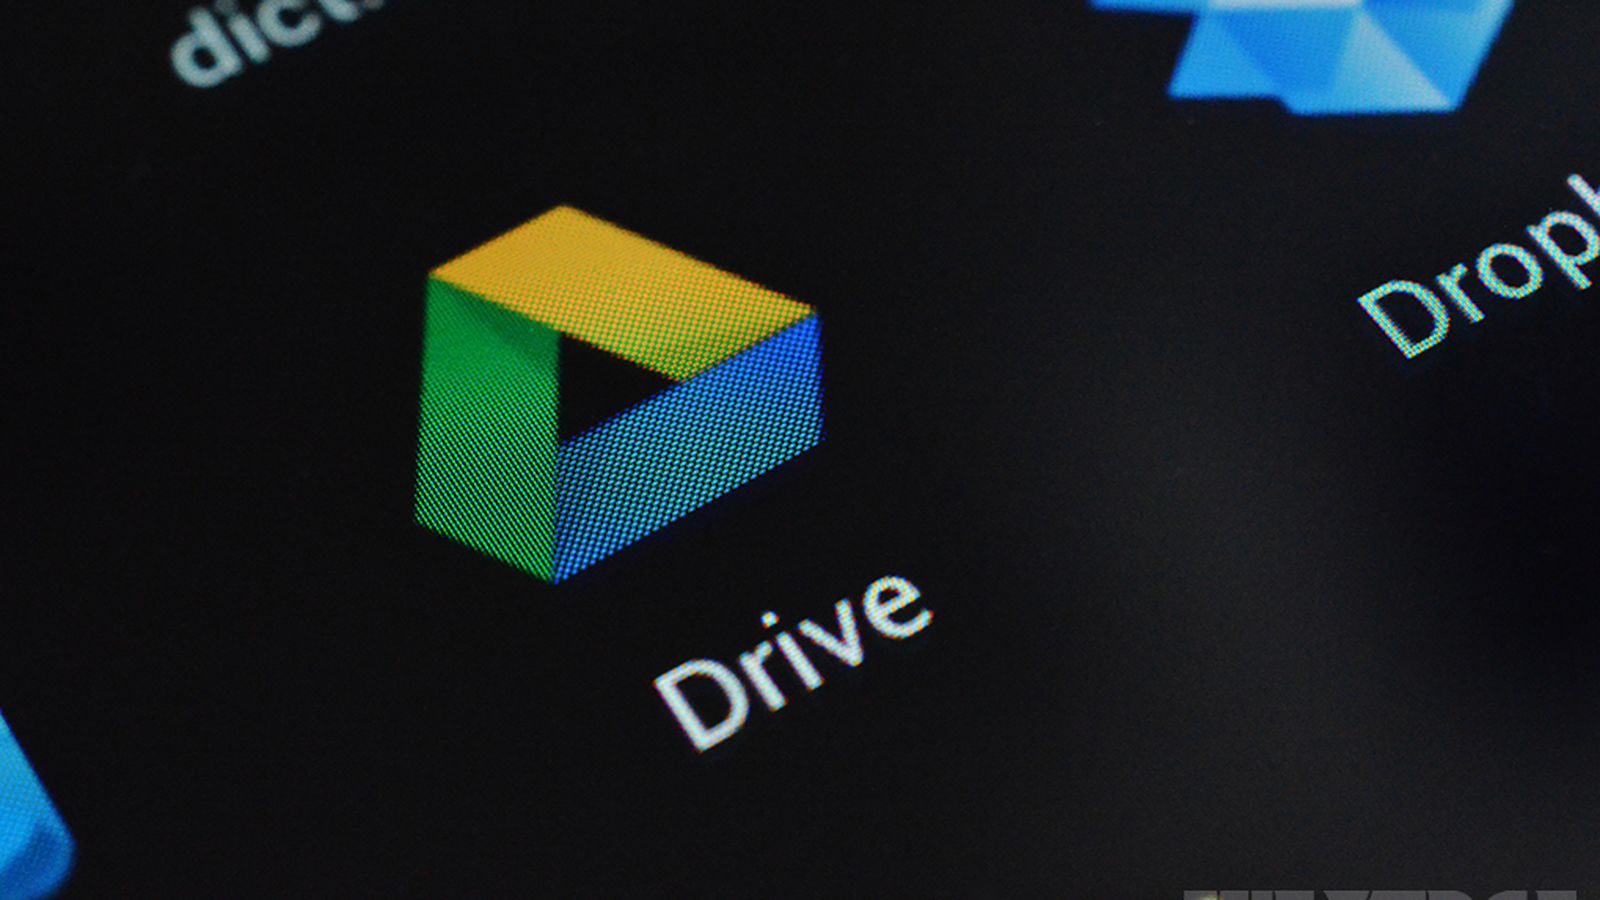 You can now view Google+ photos and videos in Drive - The Verge